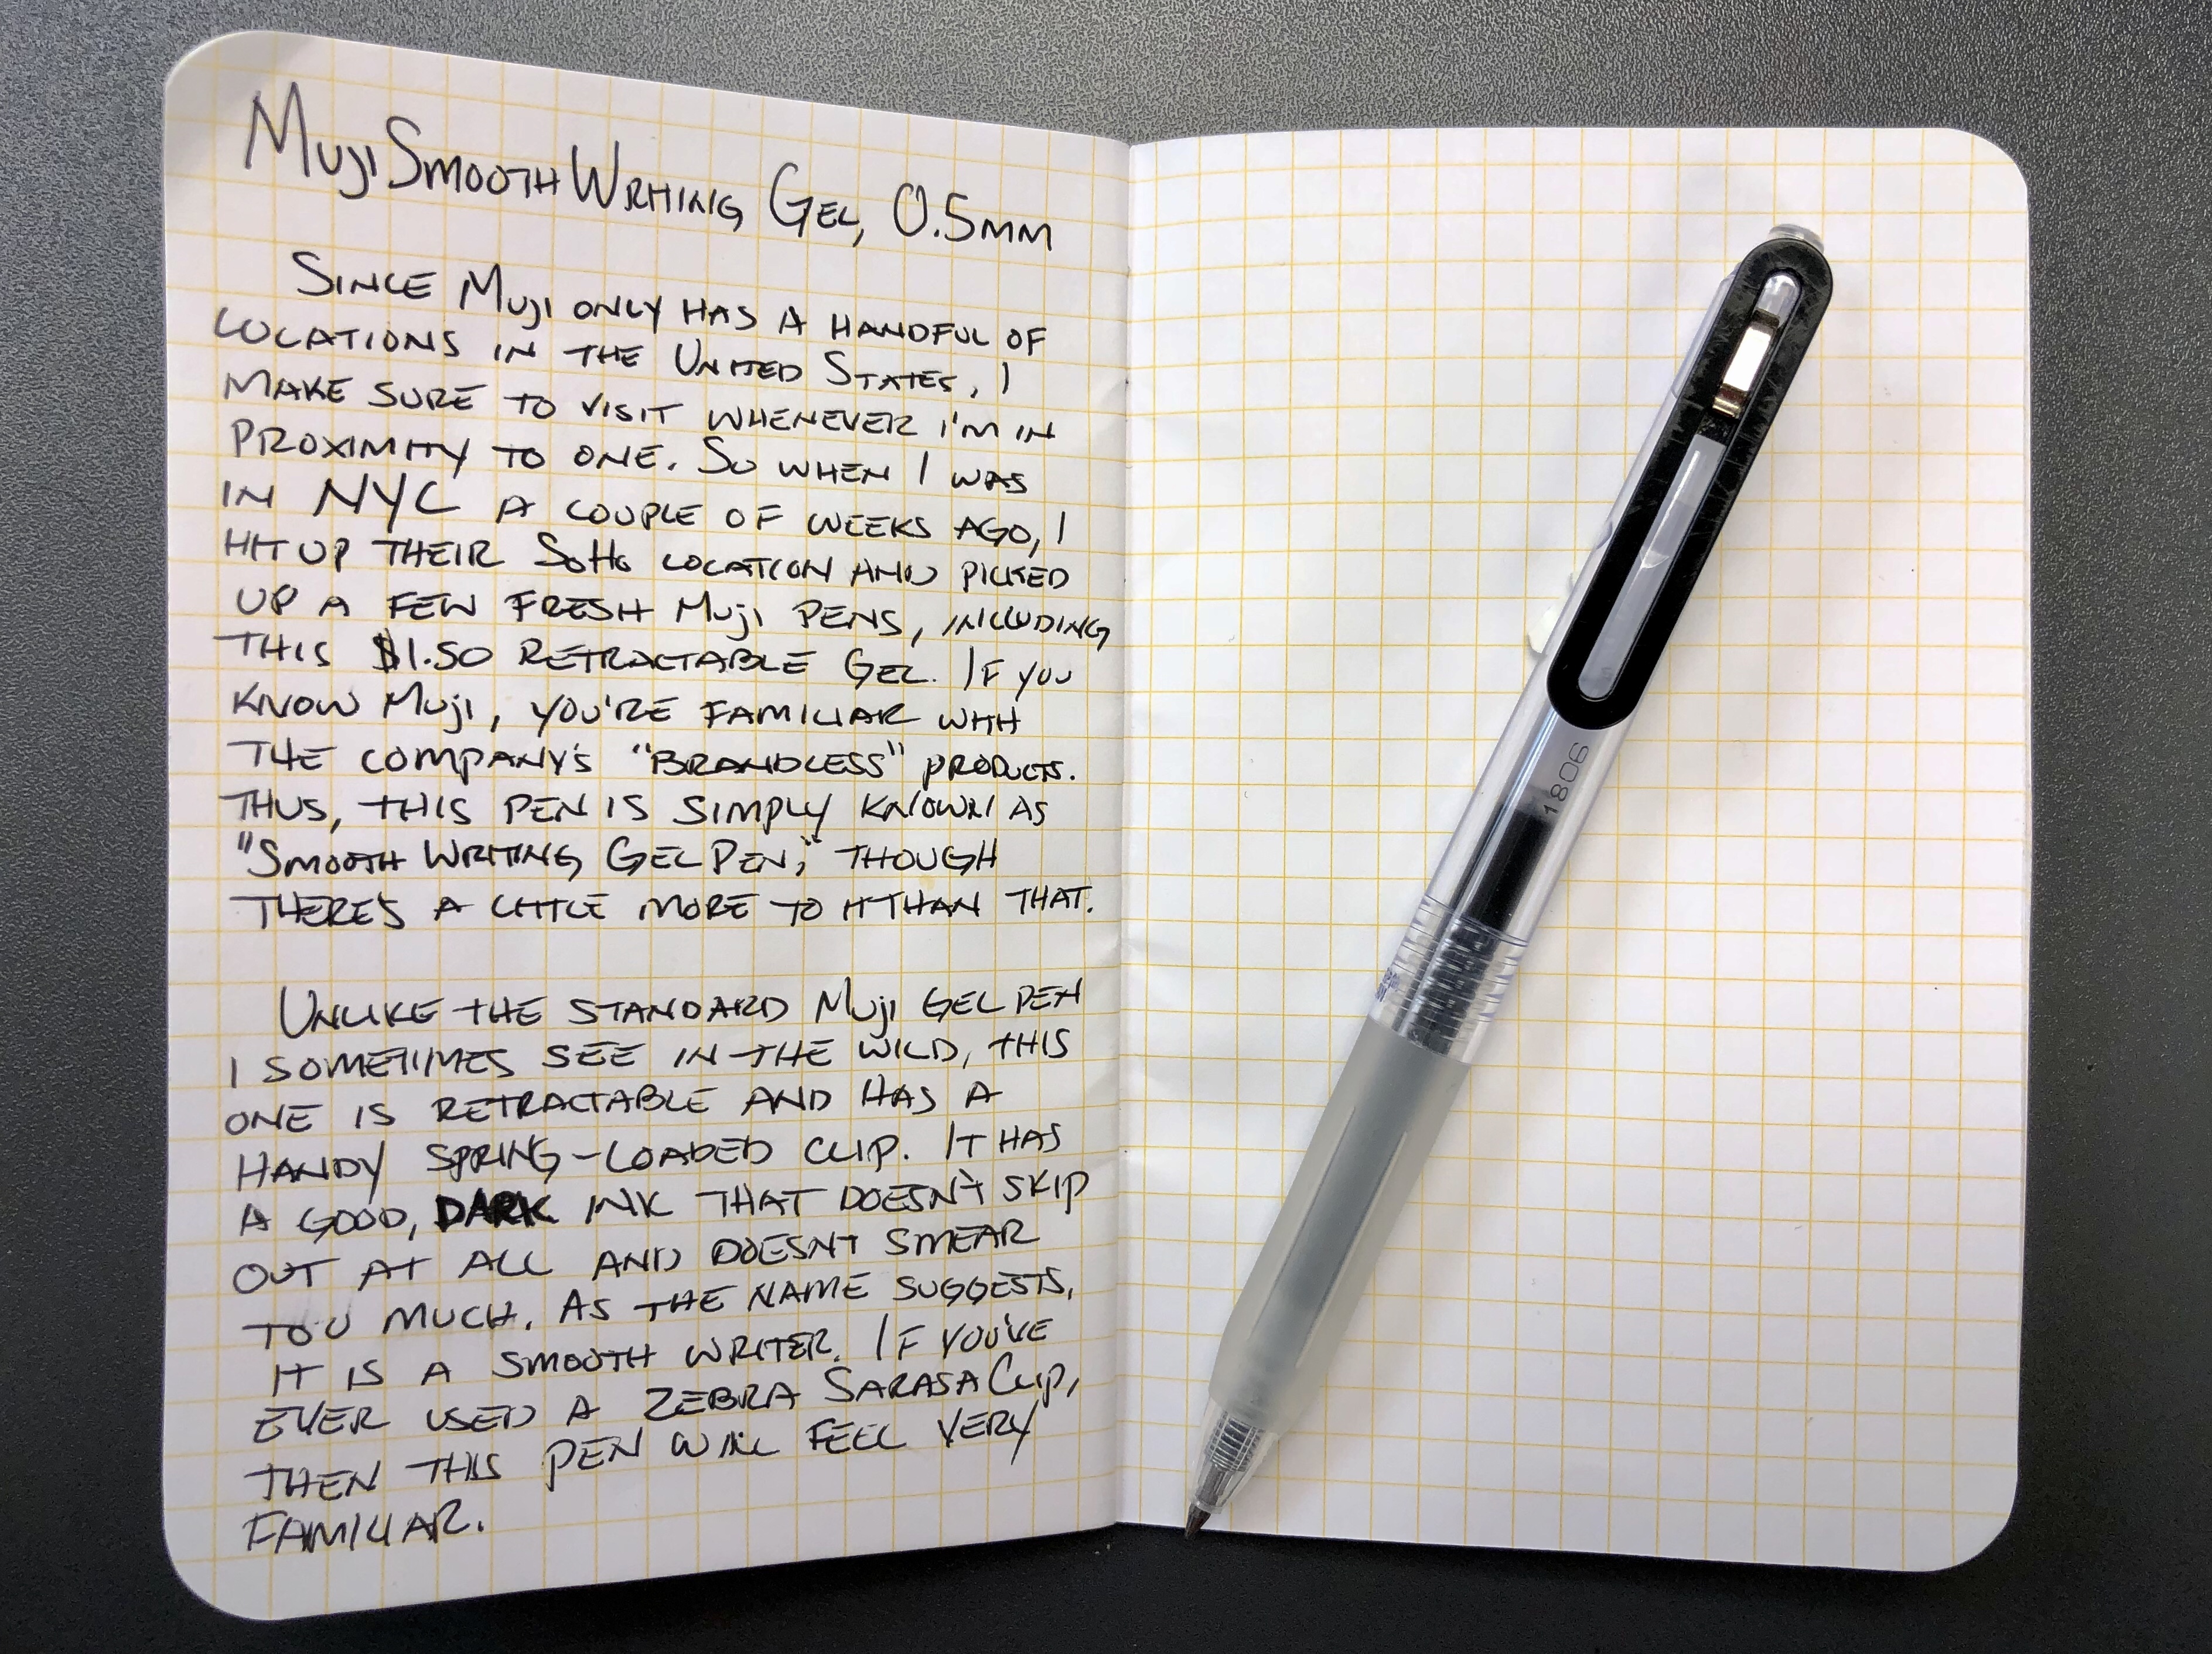 Review: Muji Smooth Writing, Gel Ink, 0.5mm – Pens and Junk